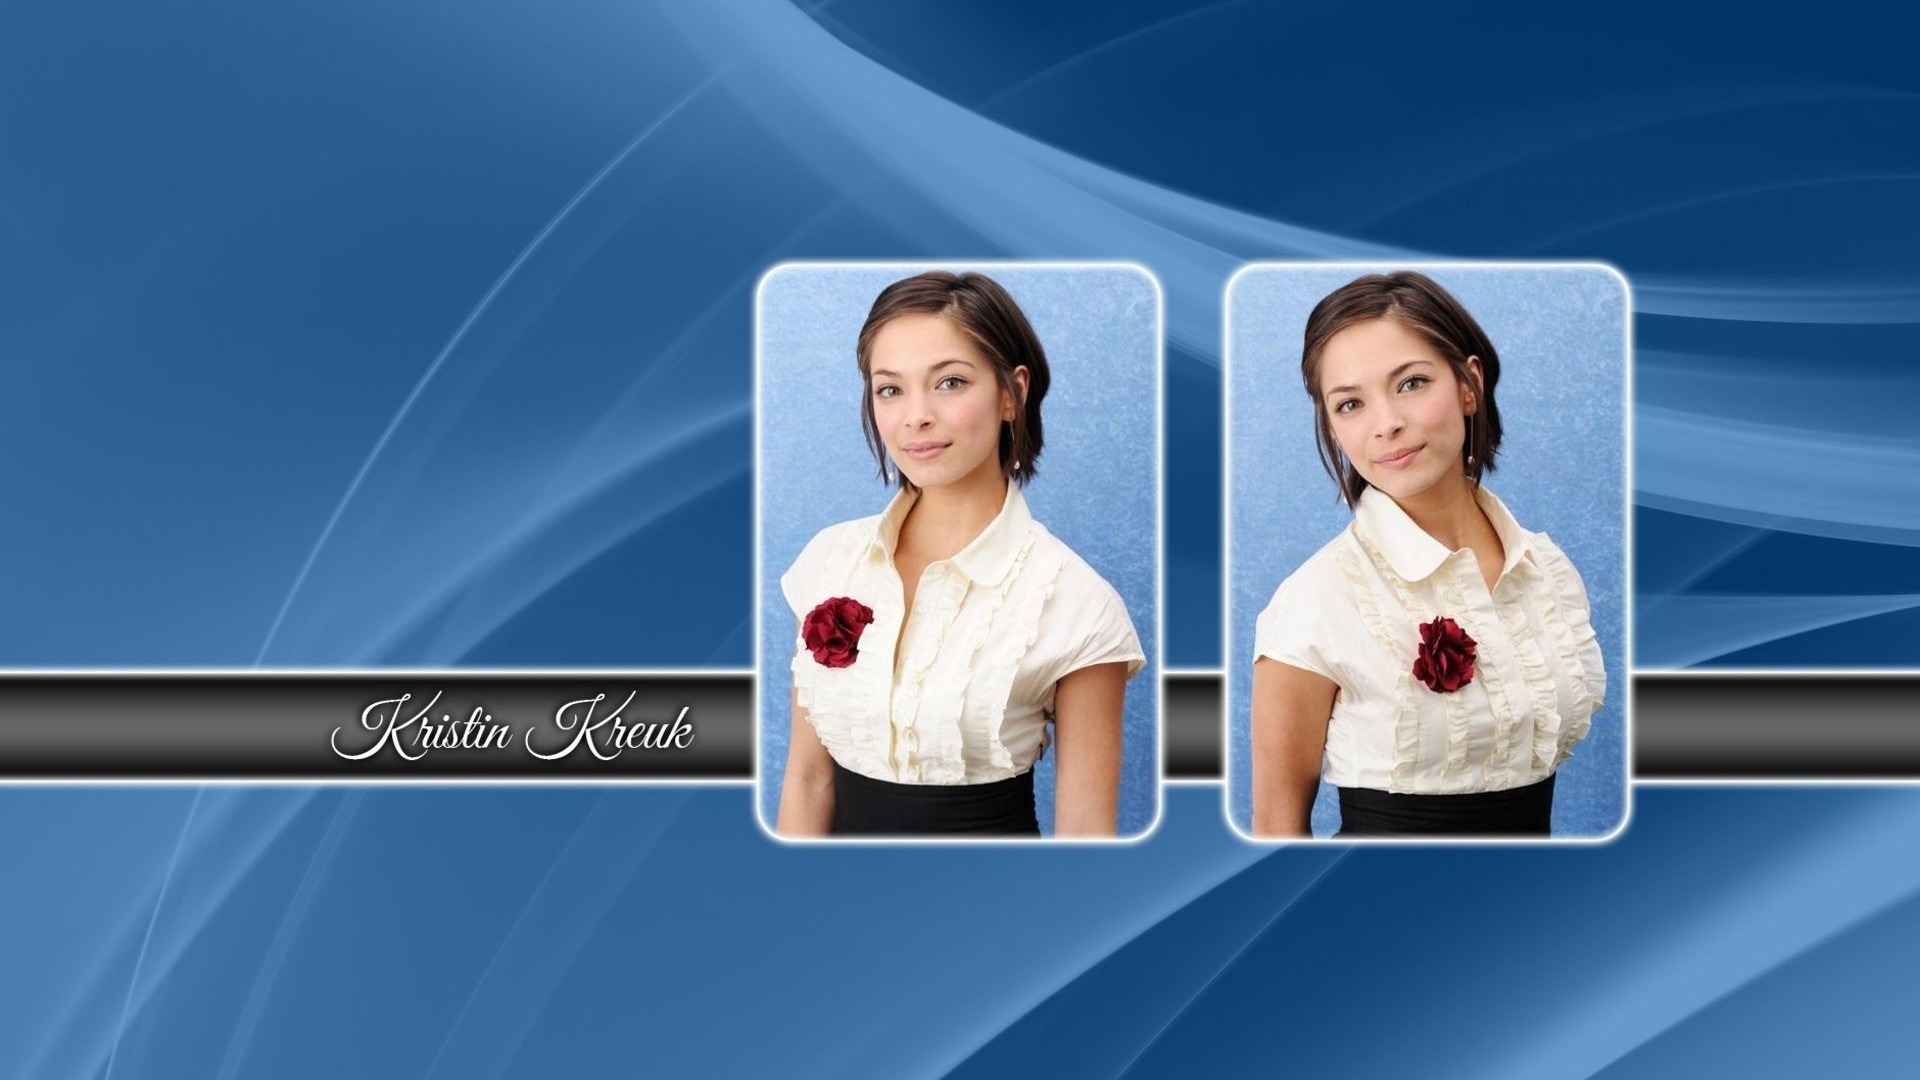 Kristin Kreuk #019 - 1920x1080 Wallpapers Pictures Photos Images